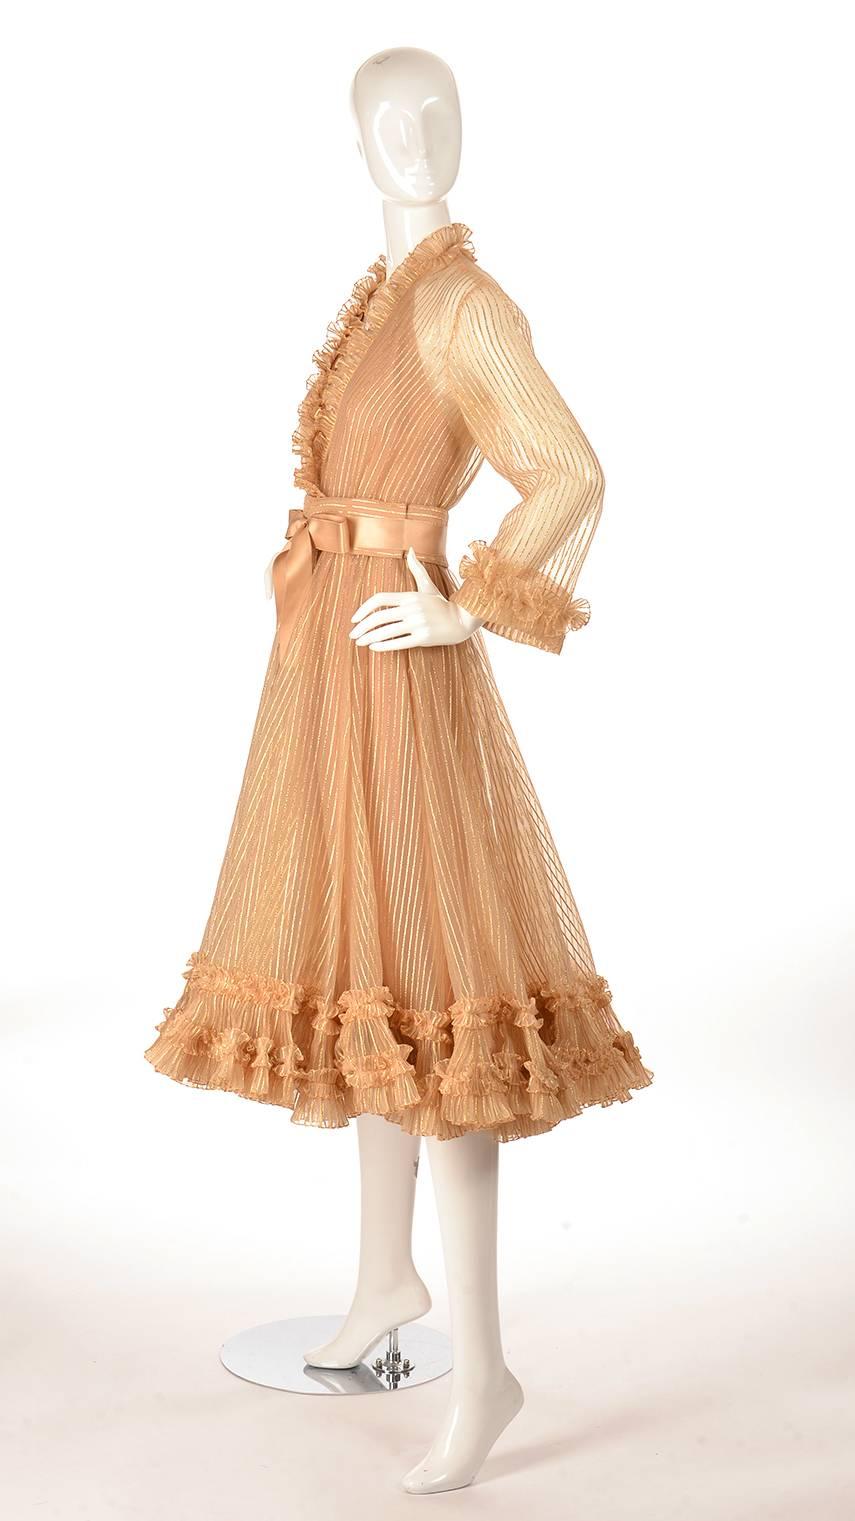 This stunning, immaculately preserved 1973 Fall/Winter cocktail dress was designed by Marc Bohan for Christian Dior. The dress is numbered 